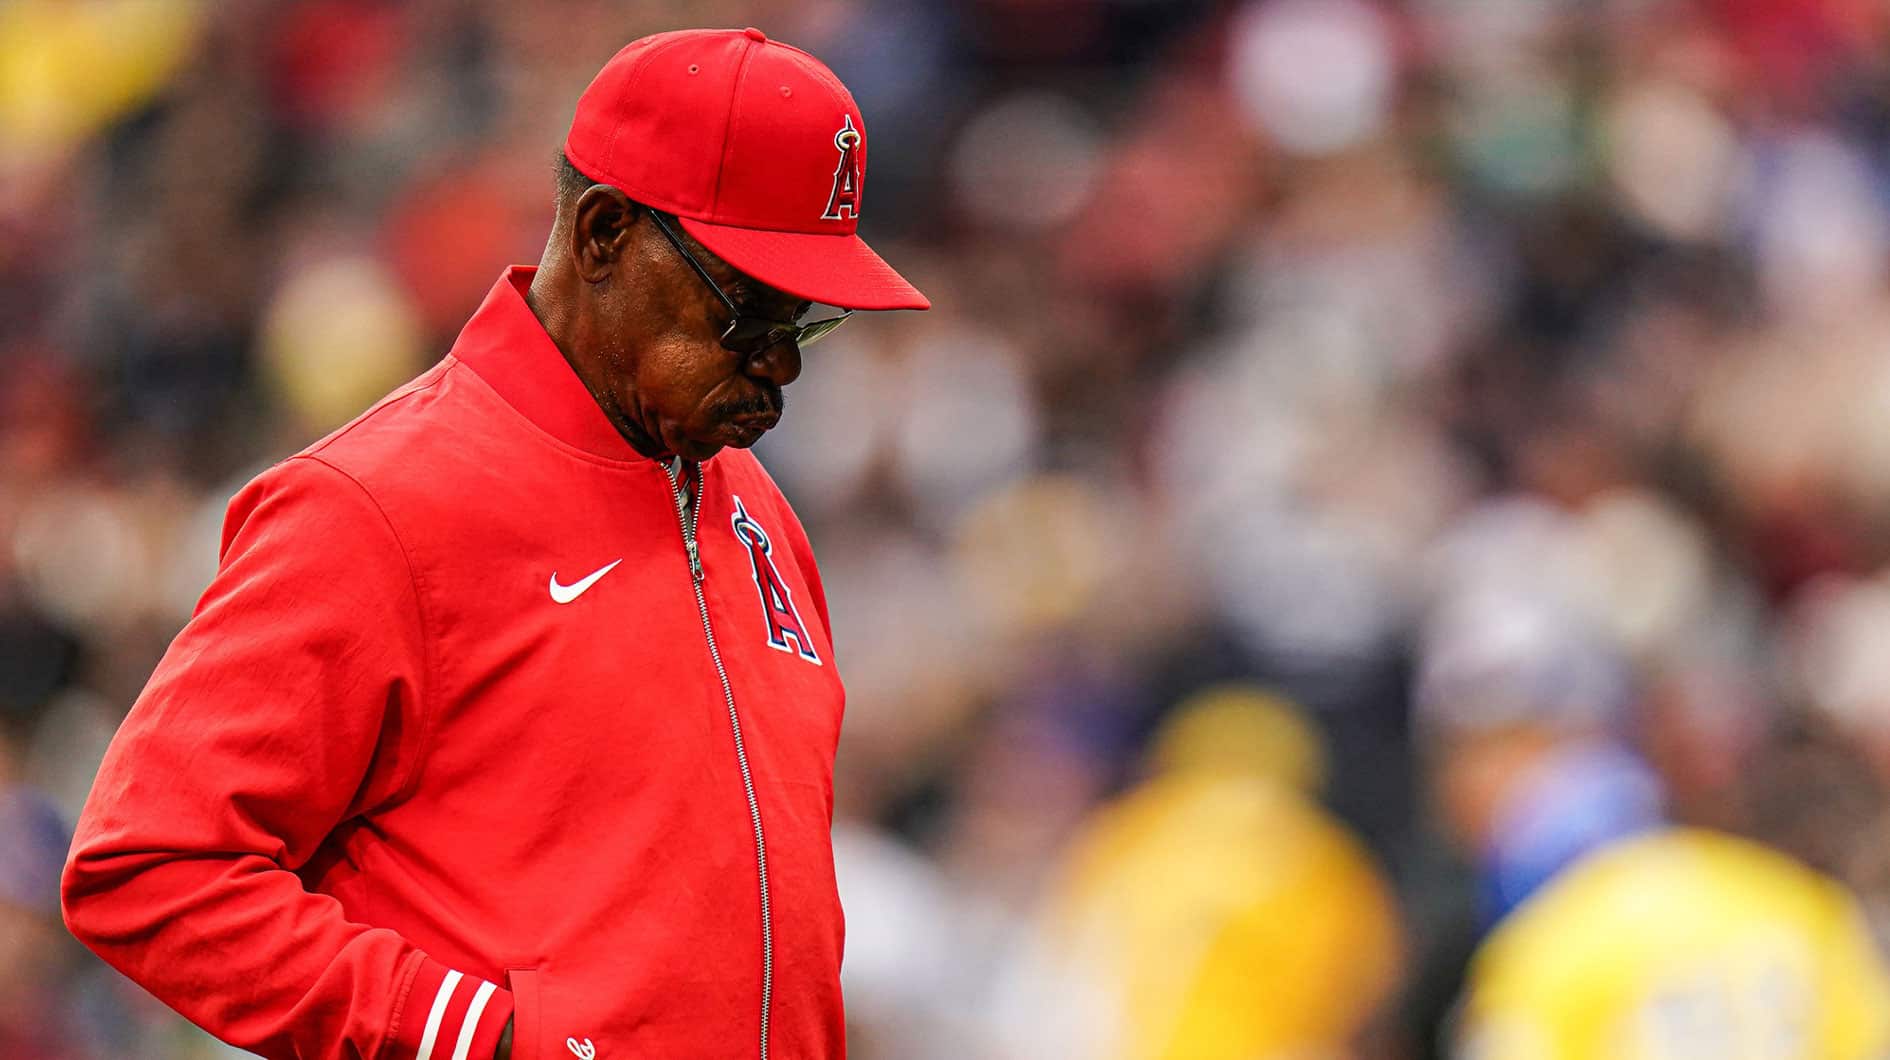 Los Angeles Angels manager Ron Washington (37) makes his way back to the dugout after talking with his players from the pitching mound as they take on the Boston Red Sox in the eighth inning at Fenway Park.